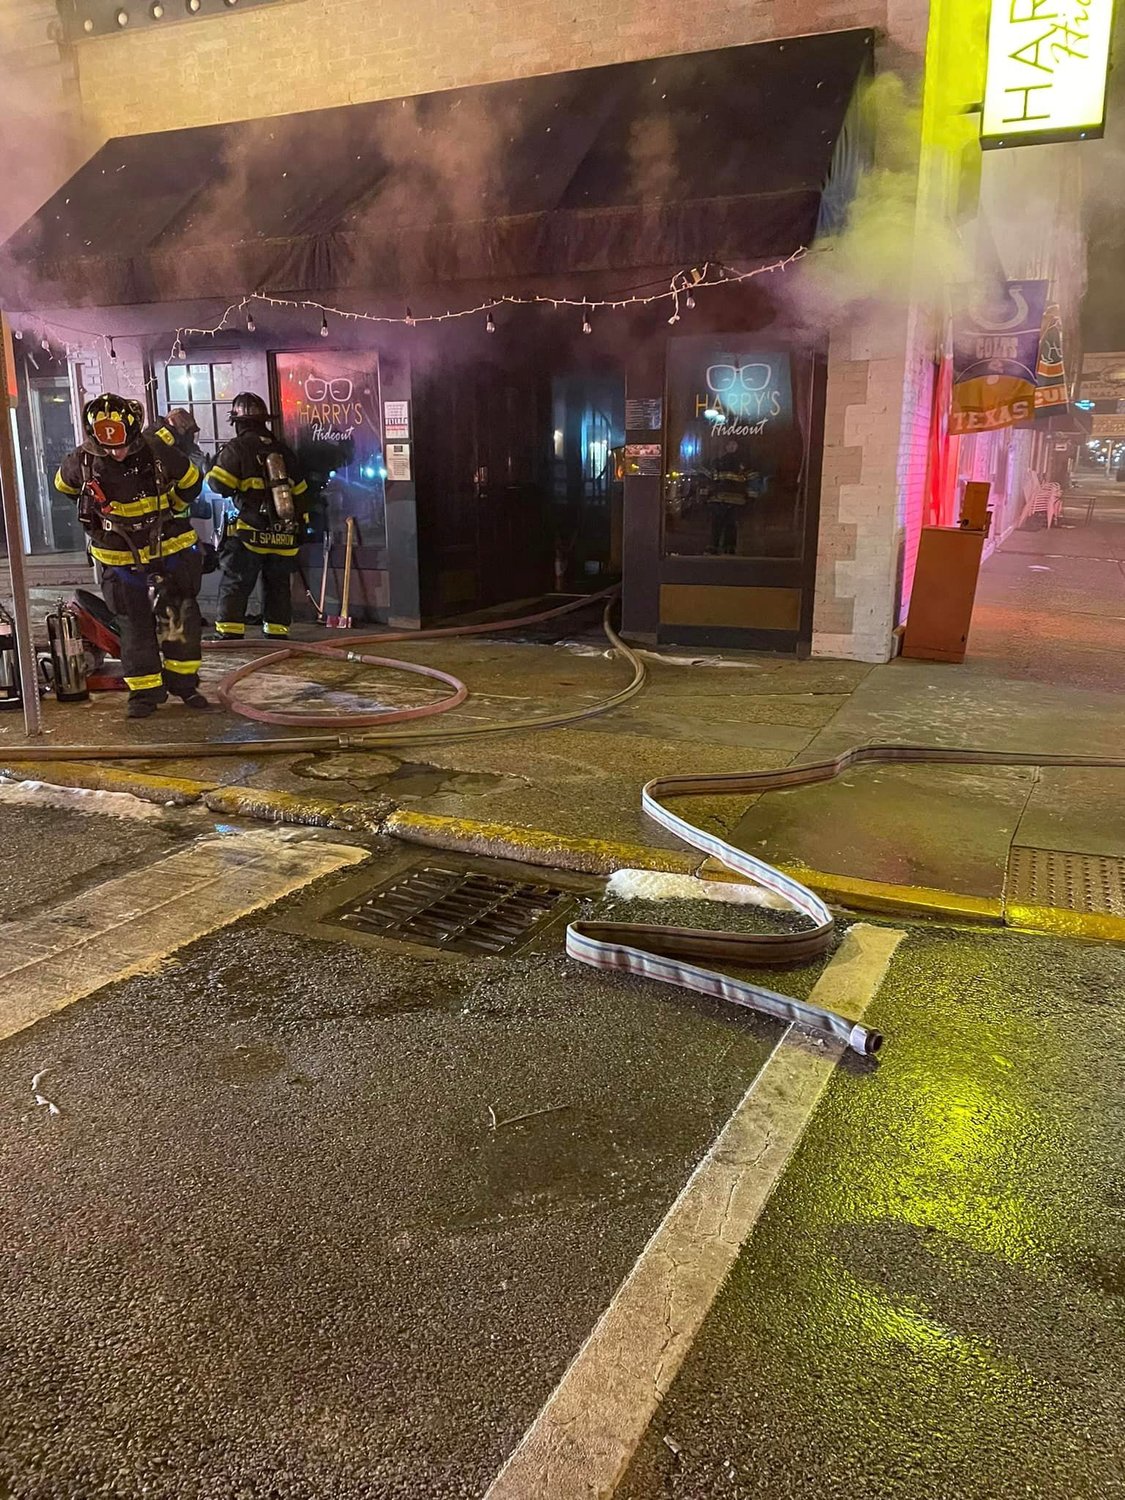 Crawfordsville firefighters respond at 3 a.m. Wednesday to a fire at Harry’s Hideout on the corner of East Main and South Washington streets.